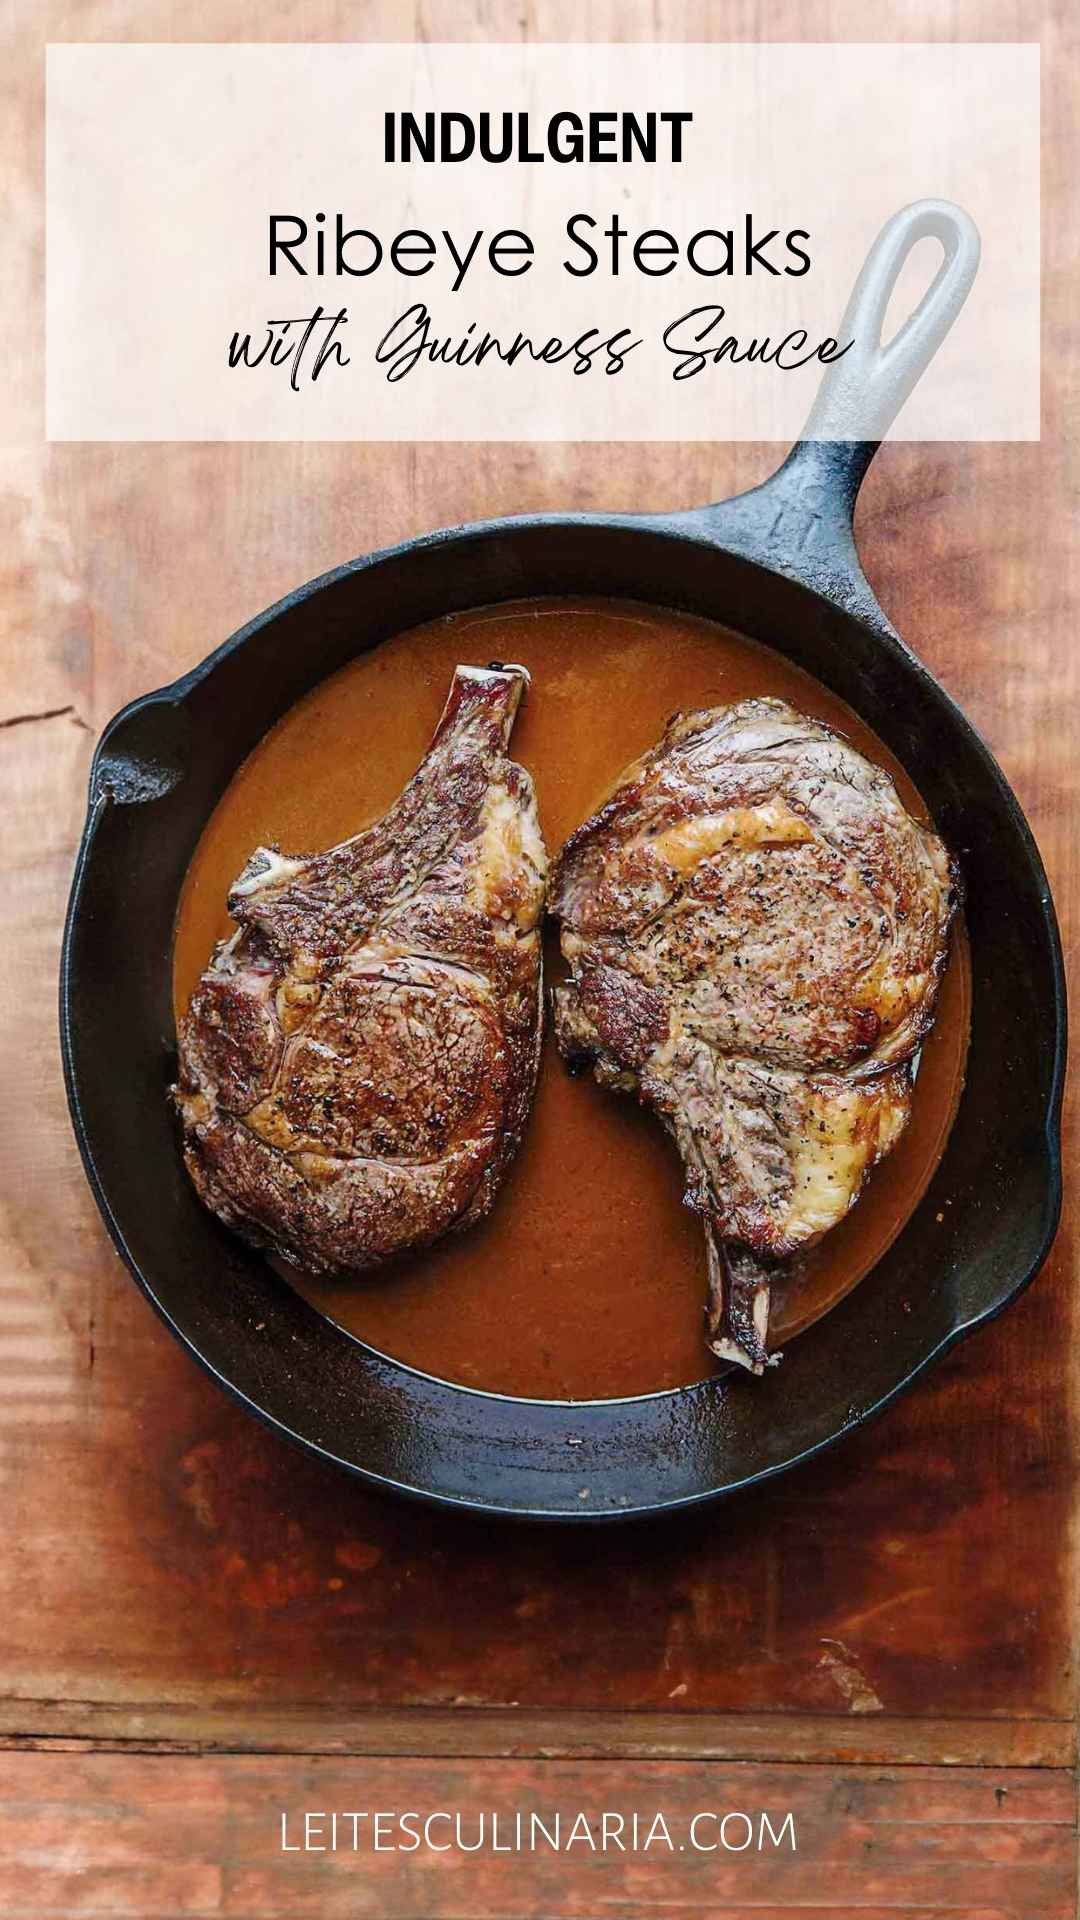 Two seared ribeye steaks in a Guinness beer sauce in a cast iron skillet.